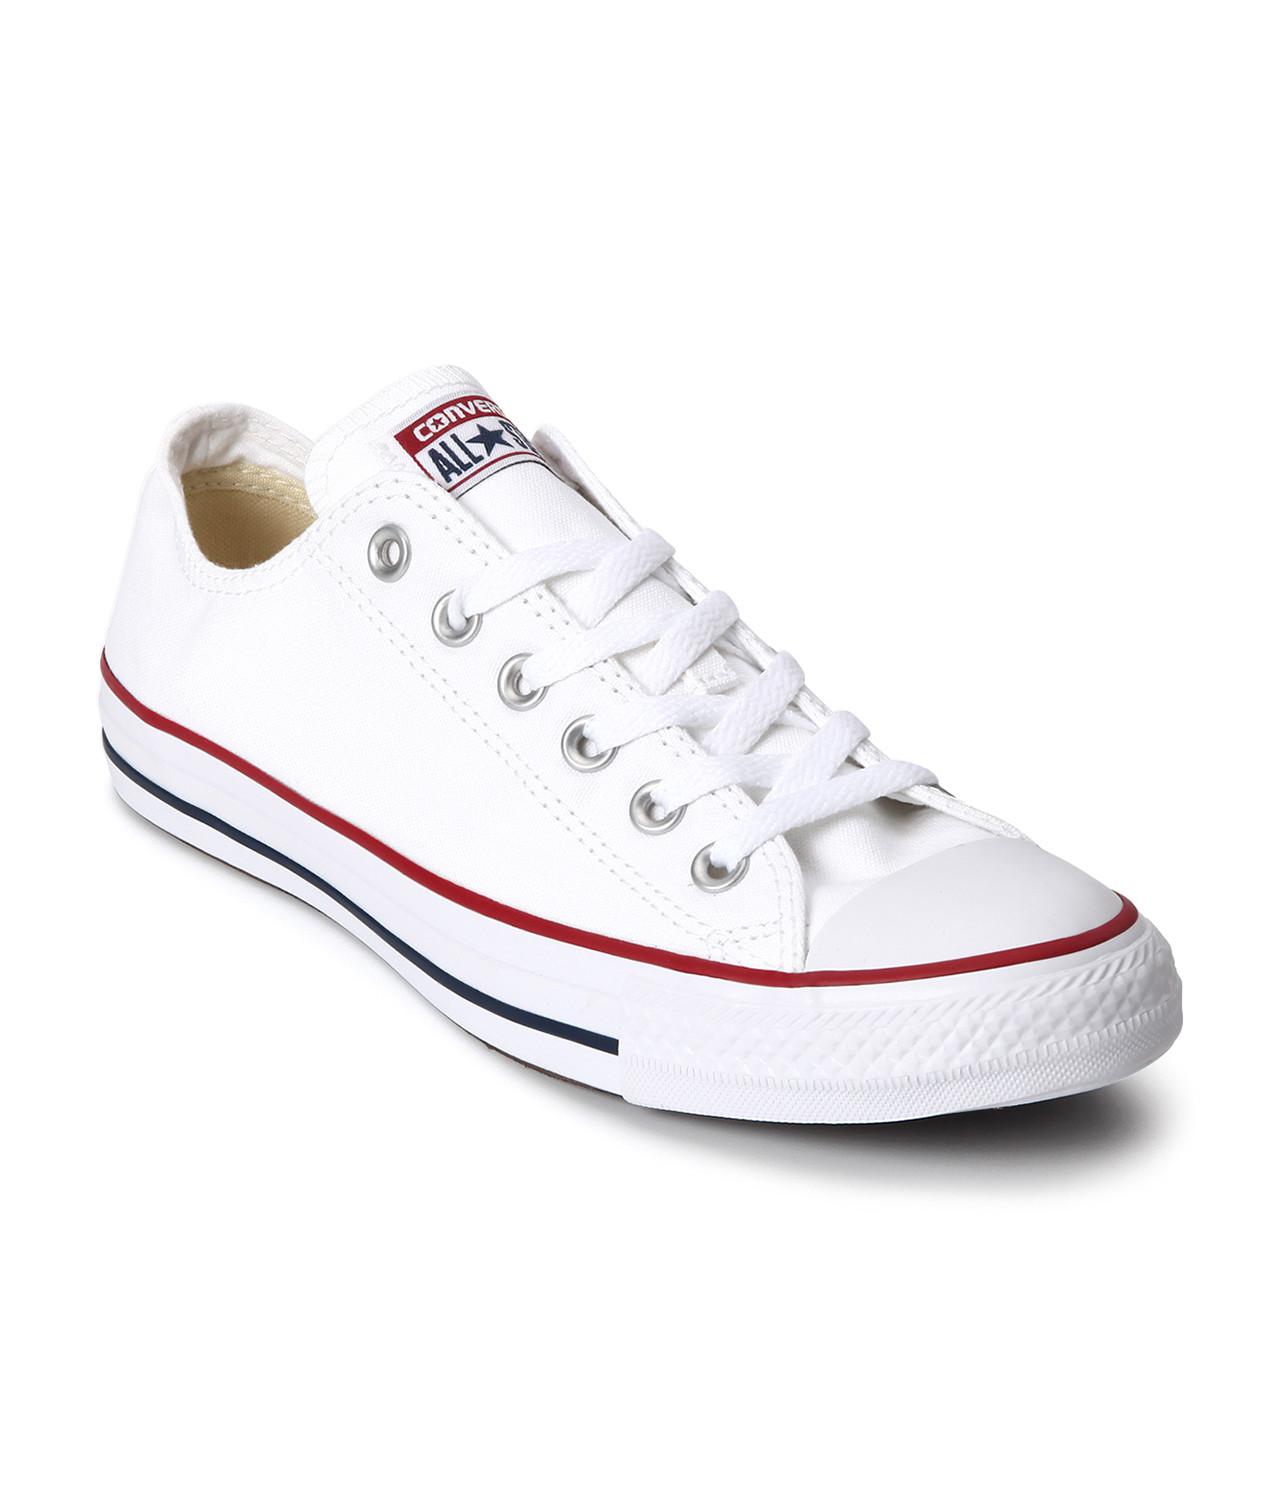 Lyst - Converse All Star Ox in White for Men